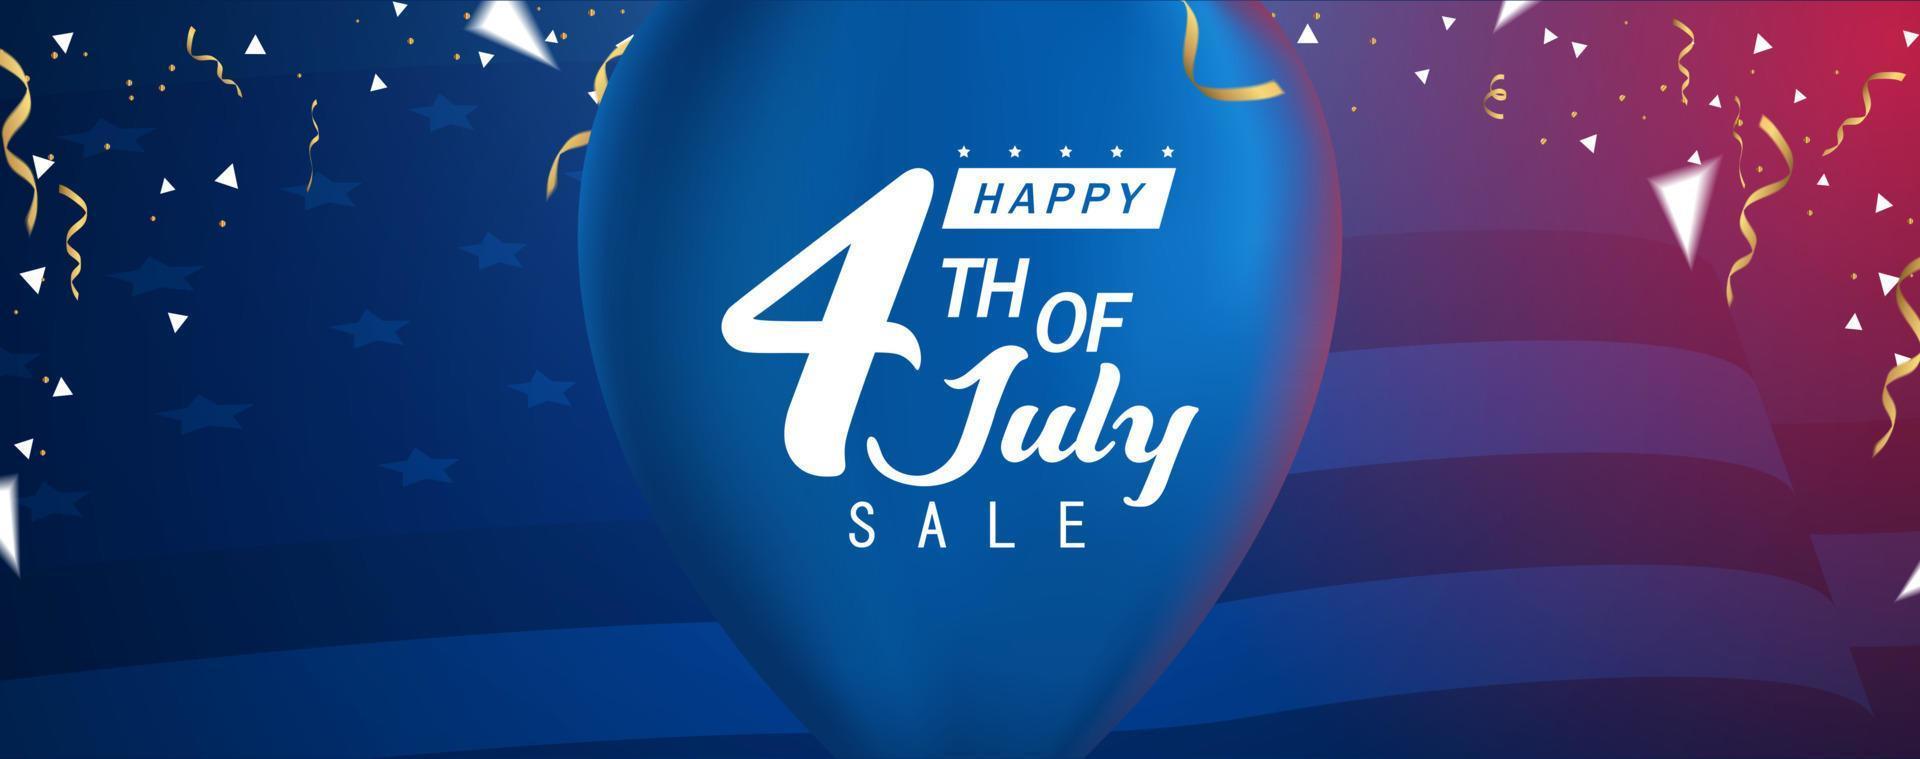 Happy 4th of July Sale, Happy Independent Day Sale Banner vector